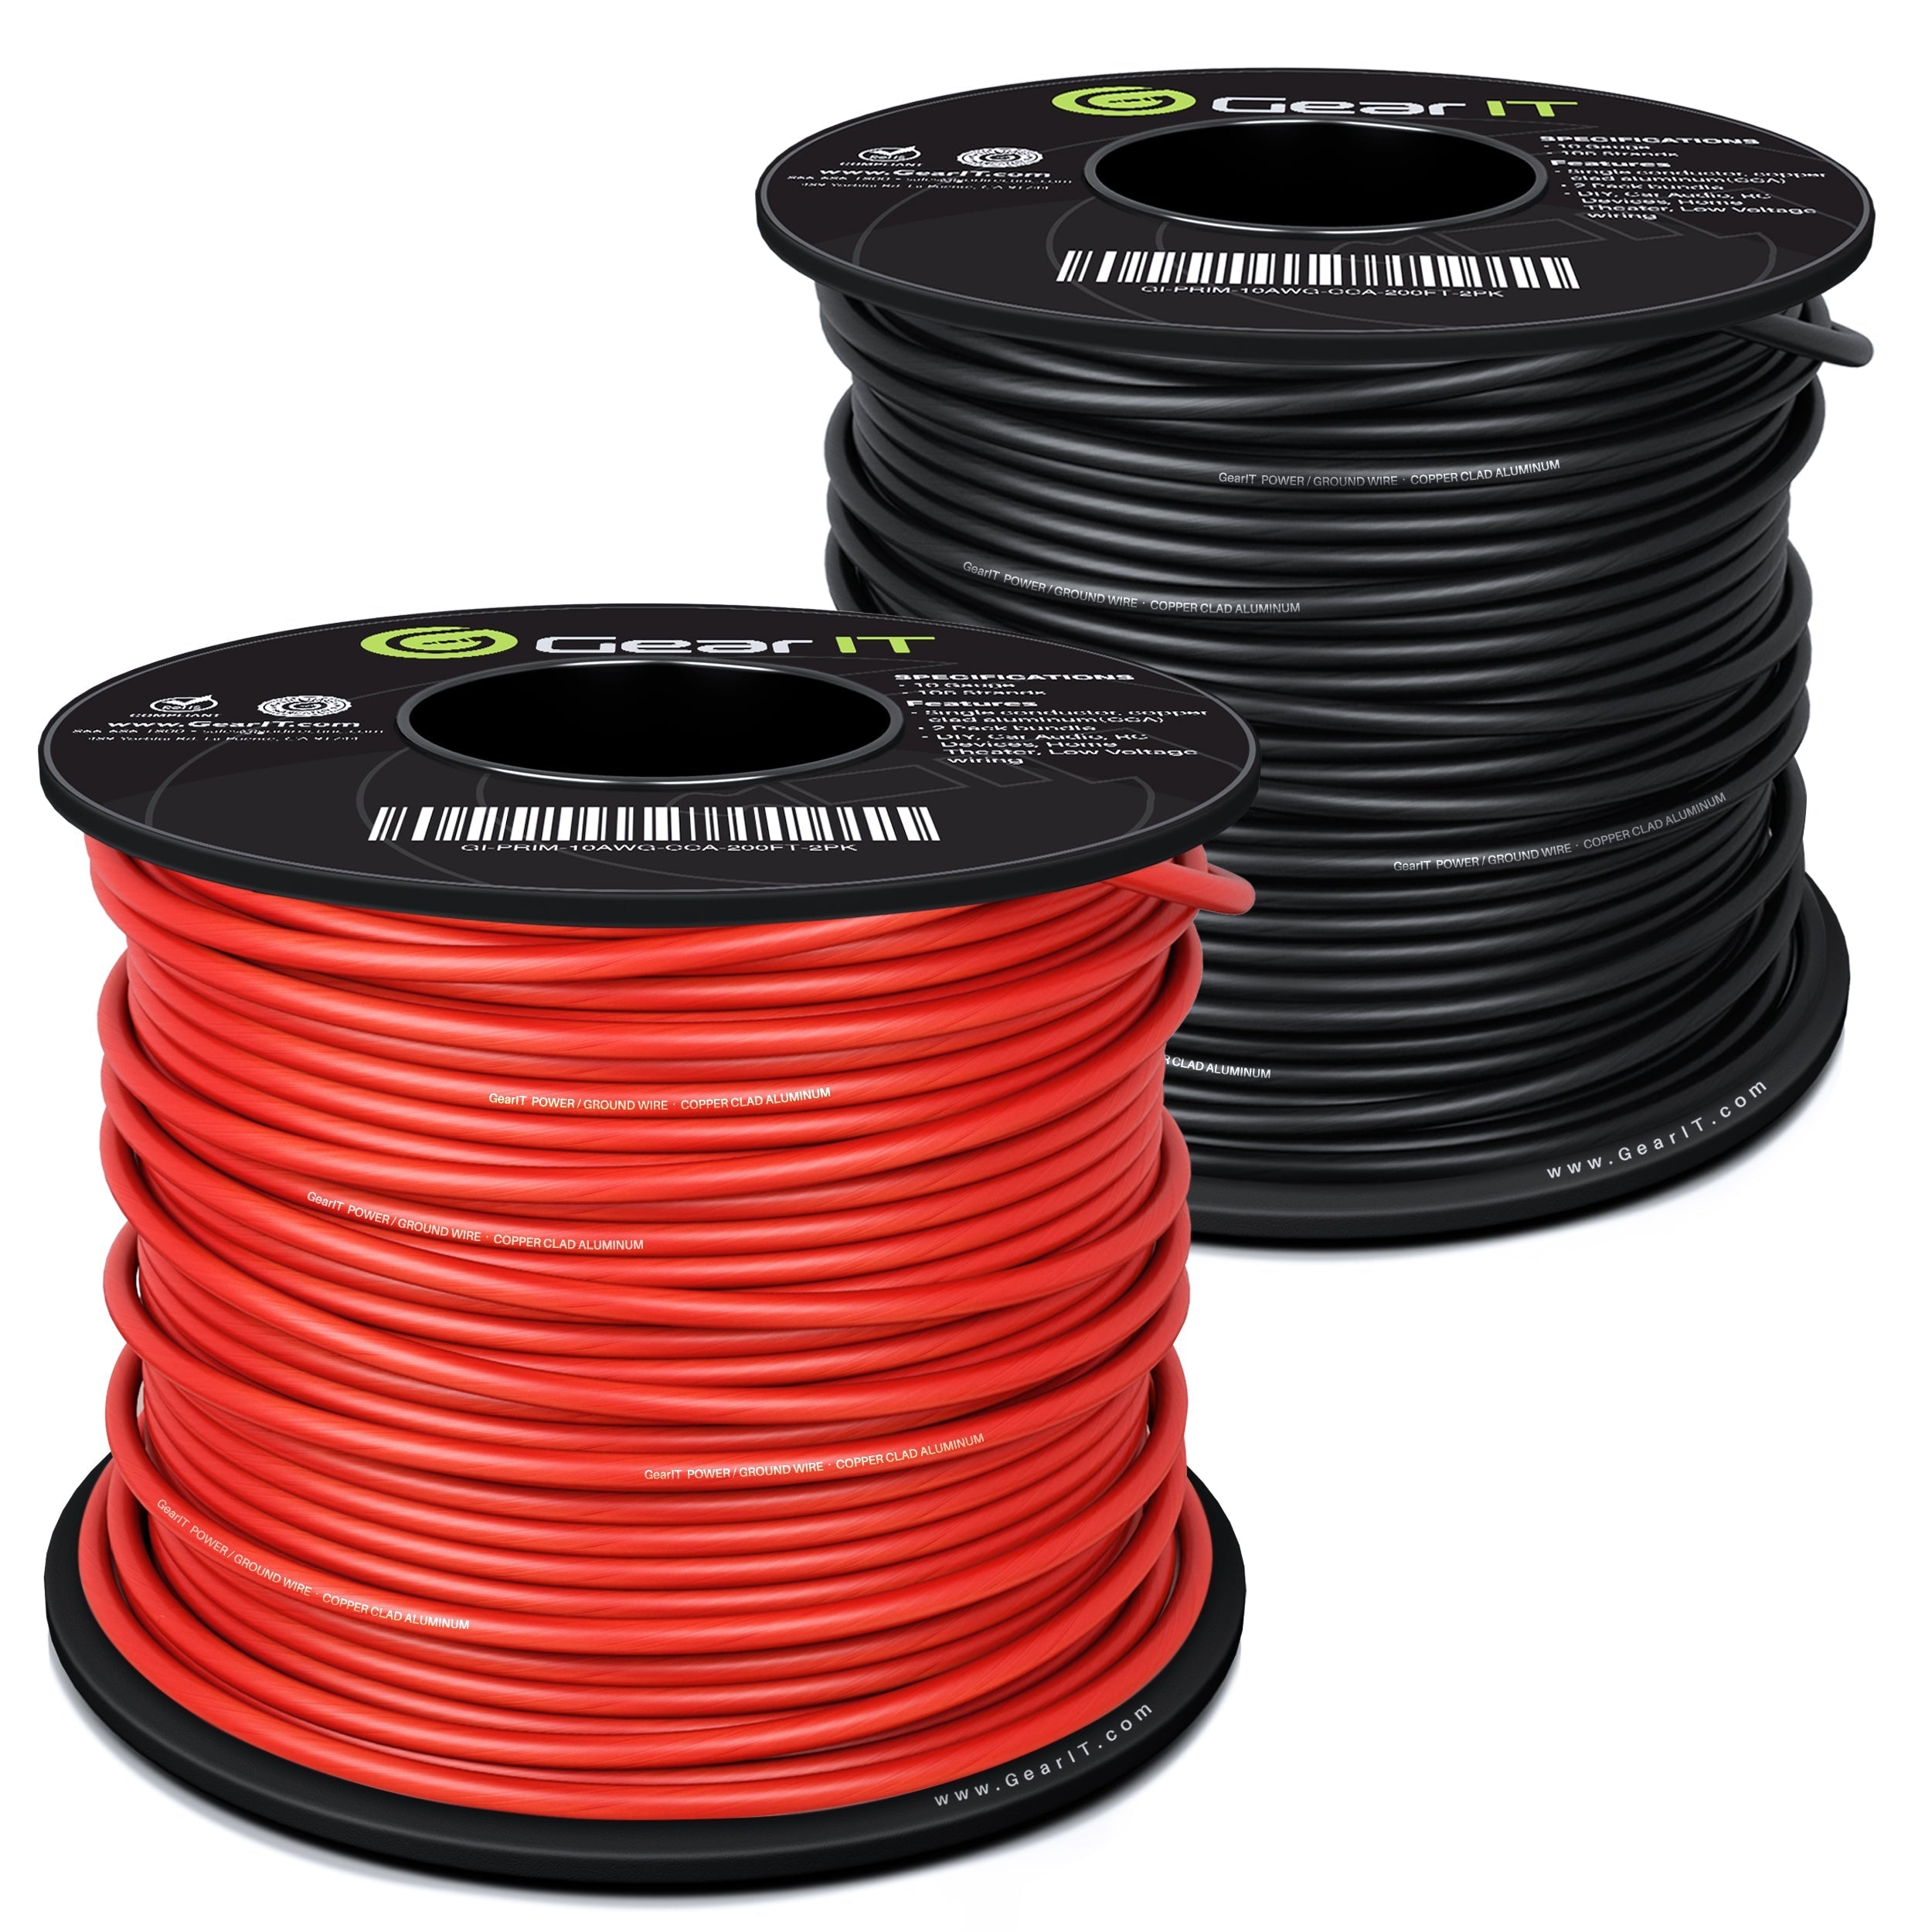 GearIT 14 Gauge Wire (100ft Each - Black/Red) Copper Clad Aluminum CCA - Primary Automotive Power/Ground for Battery Cable, Car Audio, Trailer